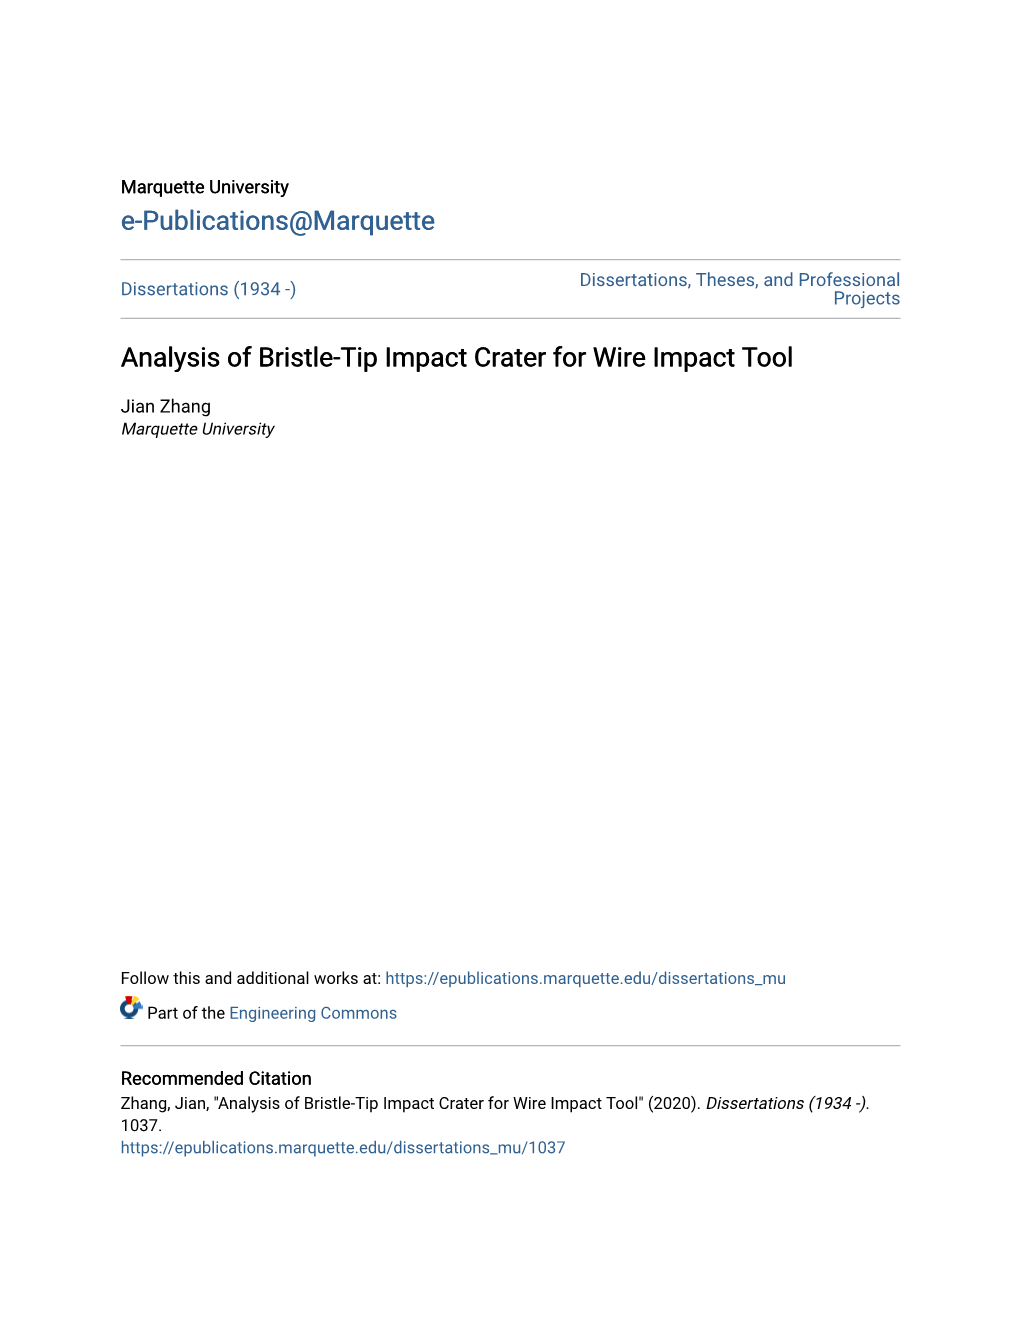 Analysis of Bristle-Tip Impact Crater for Wire Impact Tool